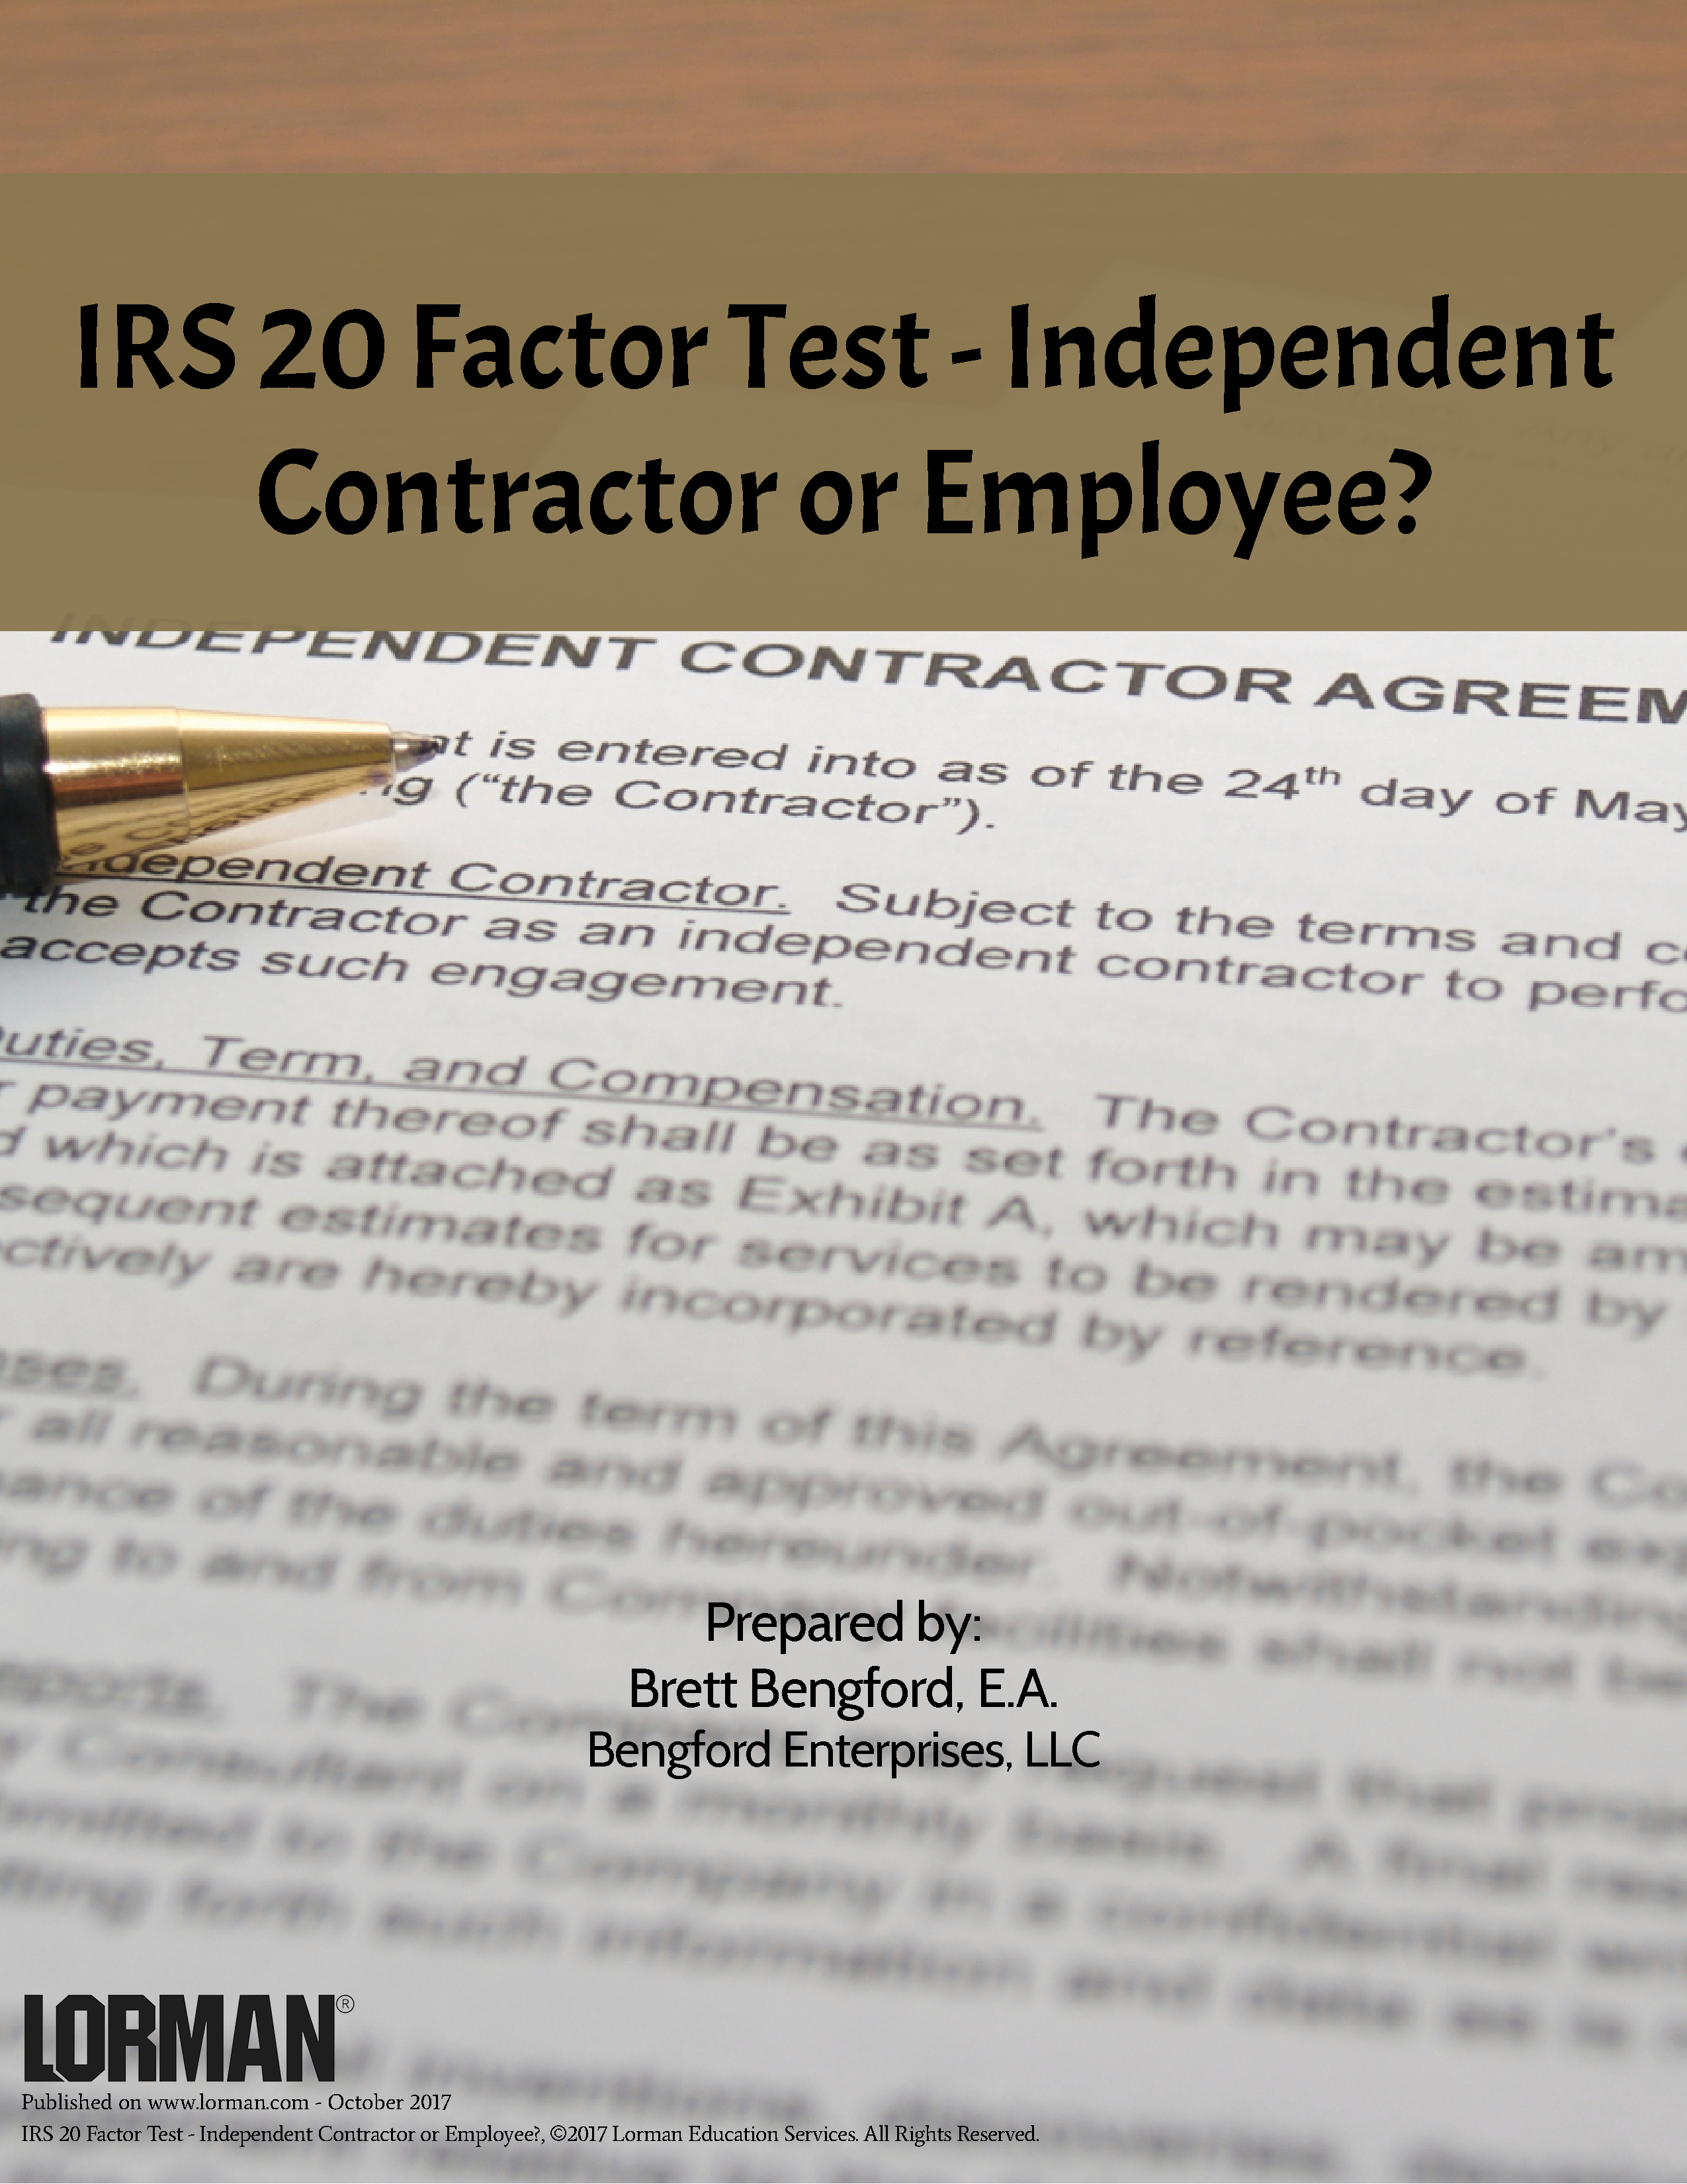 IRS 20 Factor Test - Independent Contractor or Employee?